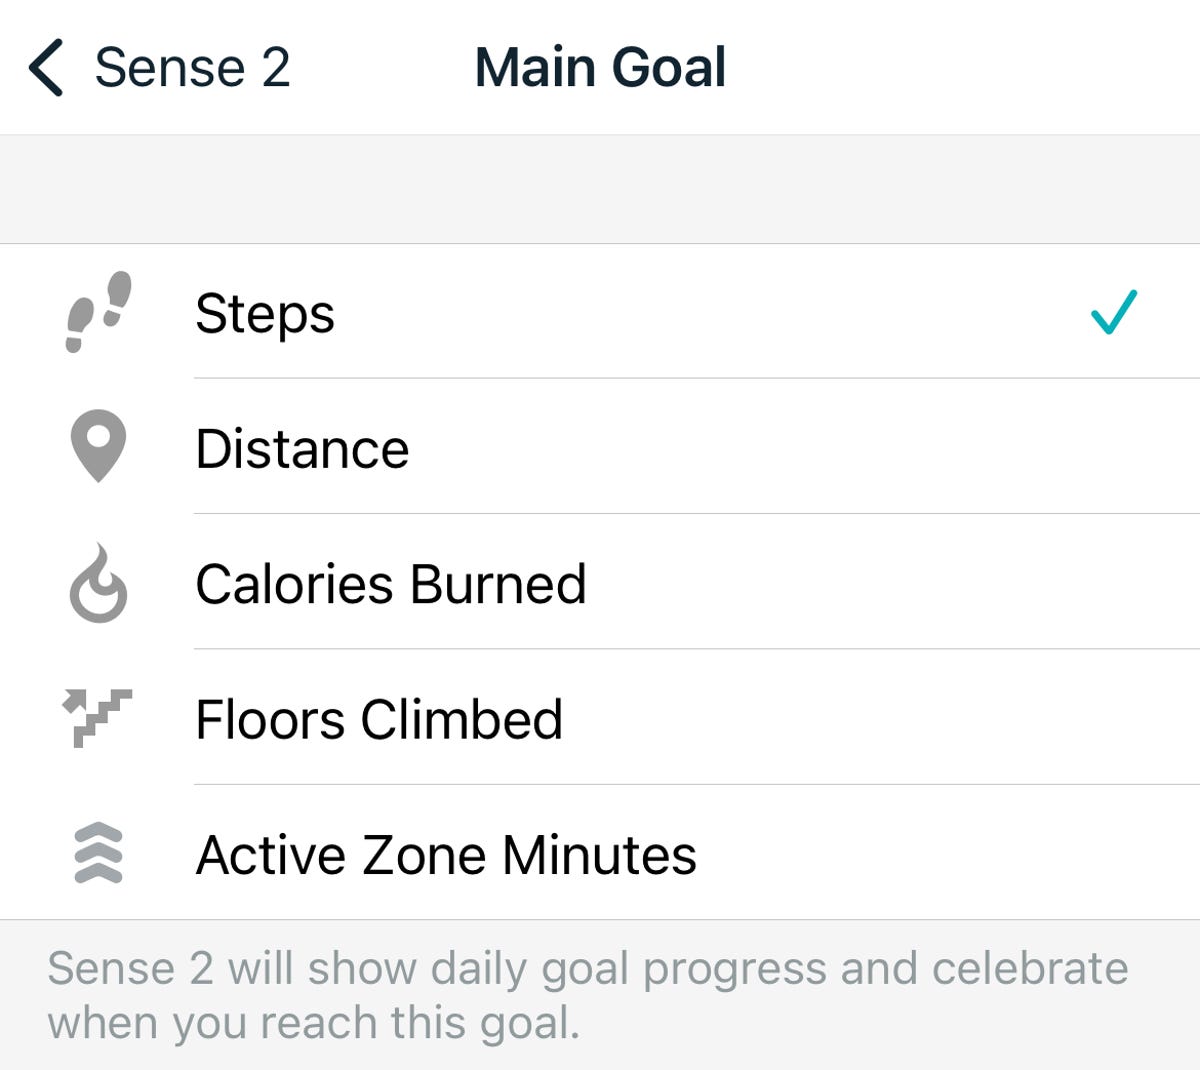 A screenshot of the main goal options in the Fitbit app